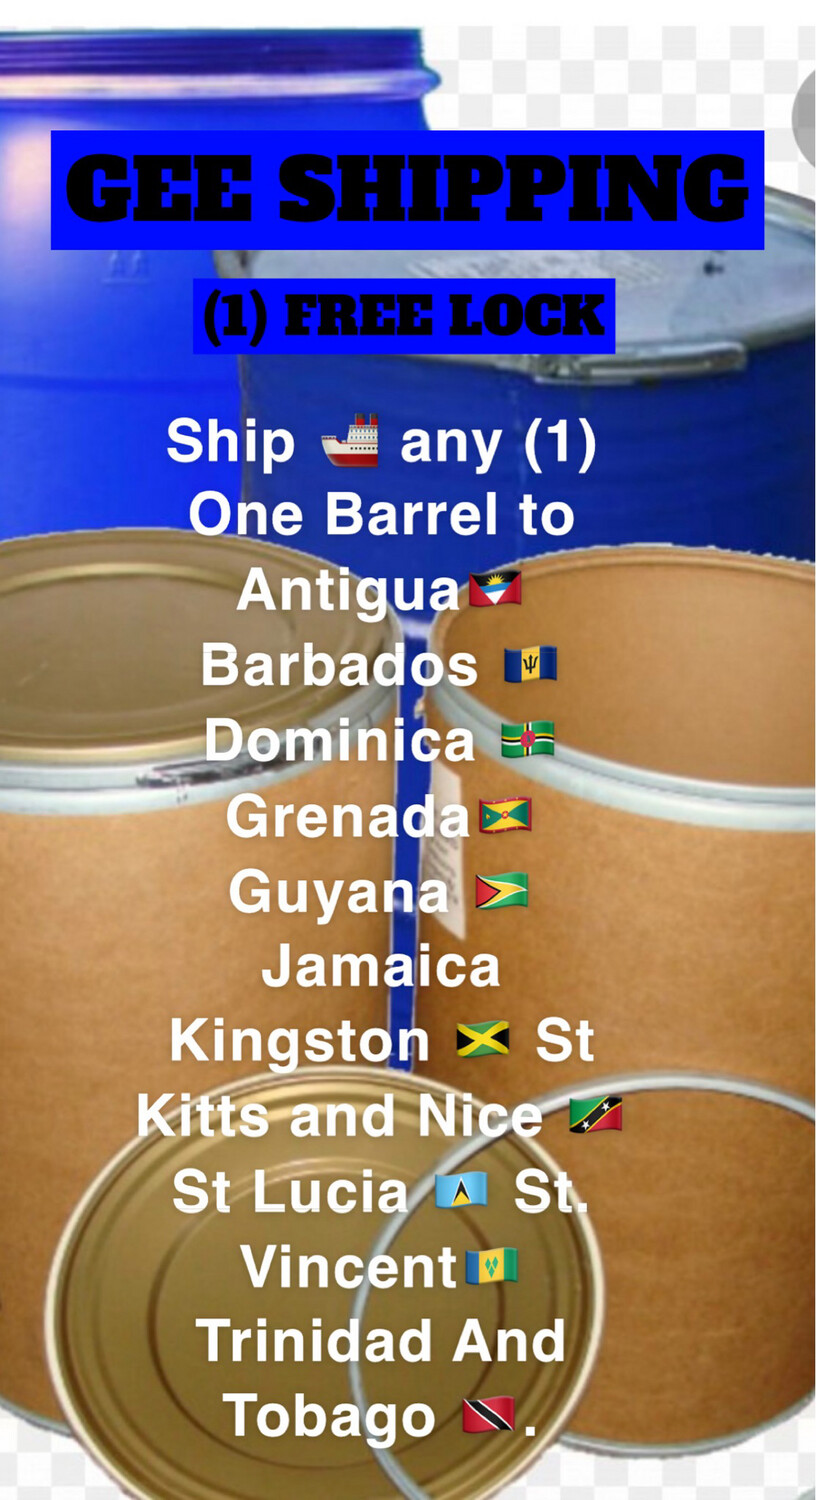 Ship 🚢 any (1) One Barrel to Antigua🇦🇬 Barbados 🇧🇧 Dominica 🇩🇲 Grenada🇬🇩 Guyana 🇬🇾 Jamaica Kingston 🇯🇲 St Kitts and Nice 🇰🇳 St Lucia 🇱🇨 St. Vincent🇻🇨 Trinidad And Tobago 🇹🇹.​ 